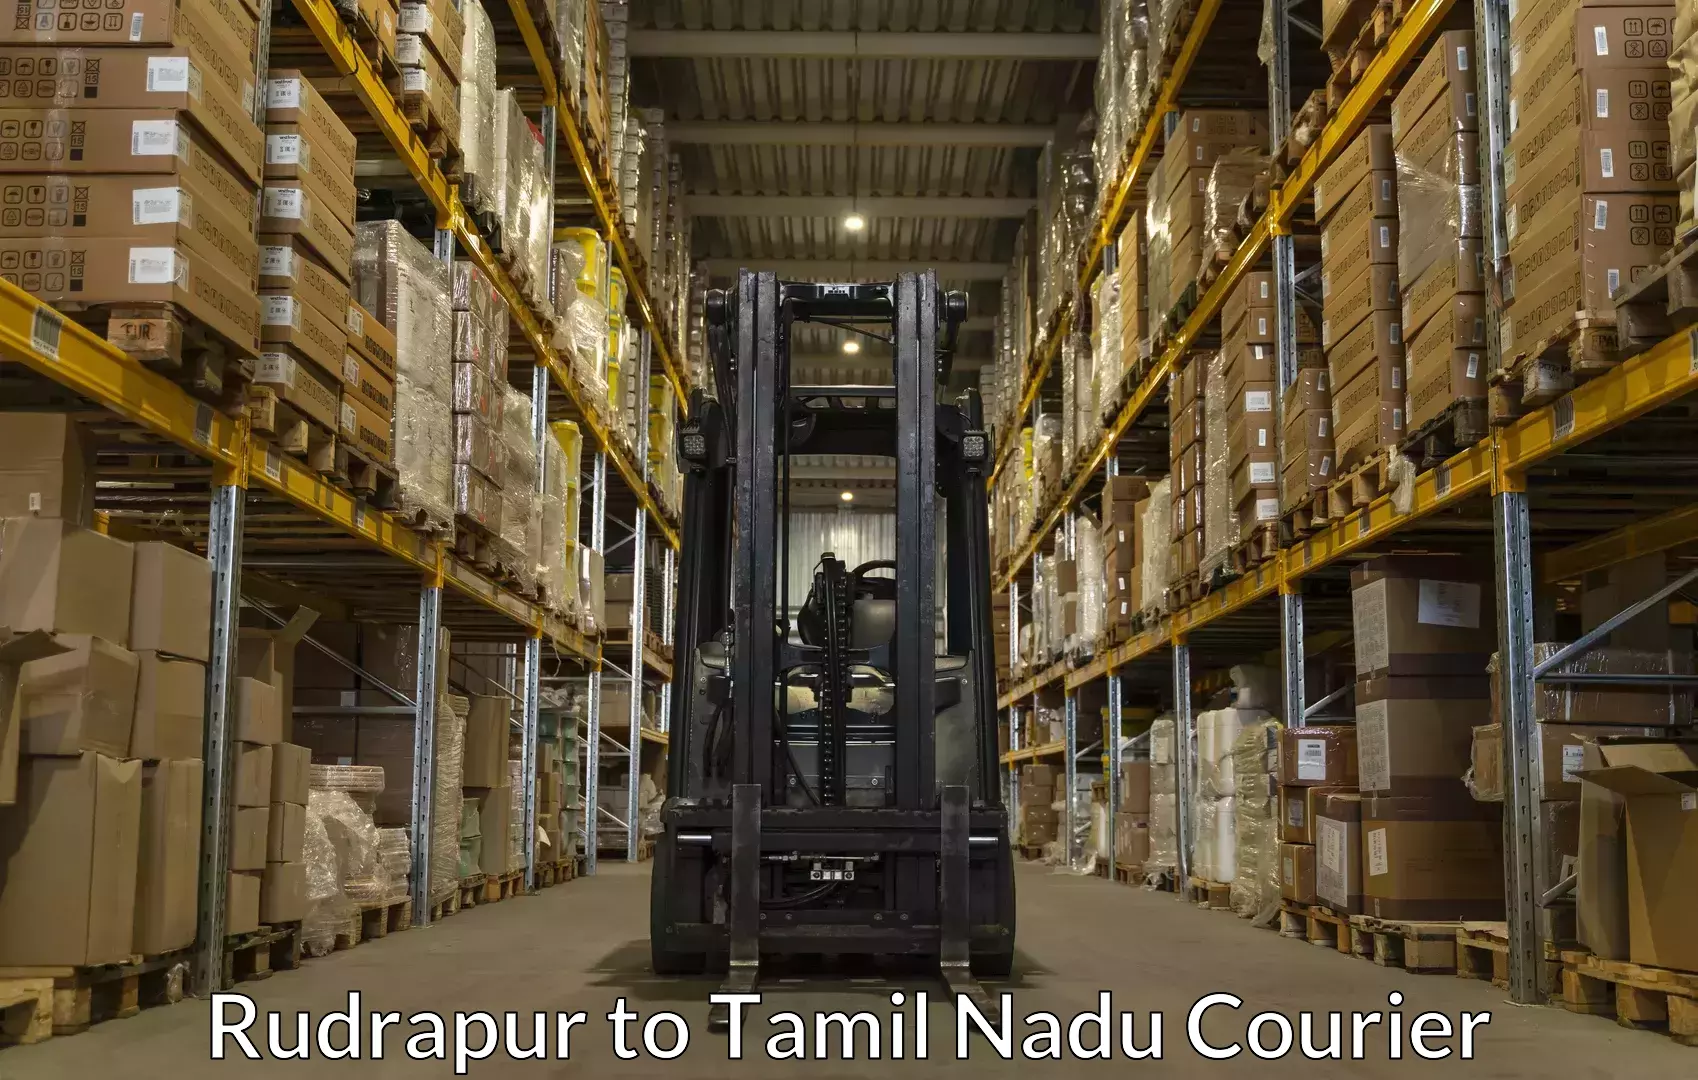 Luggage delivery network Rudrapur to Mettupalayam